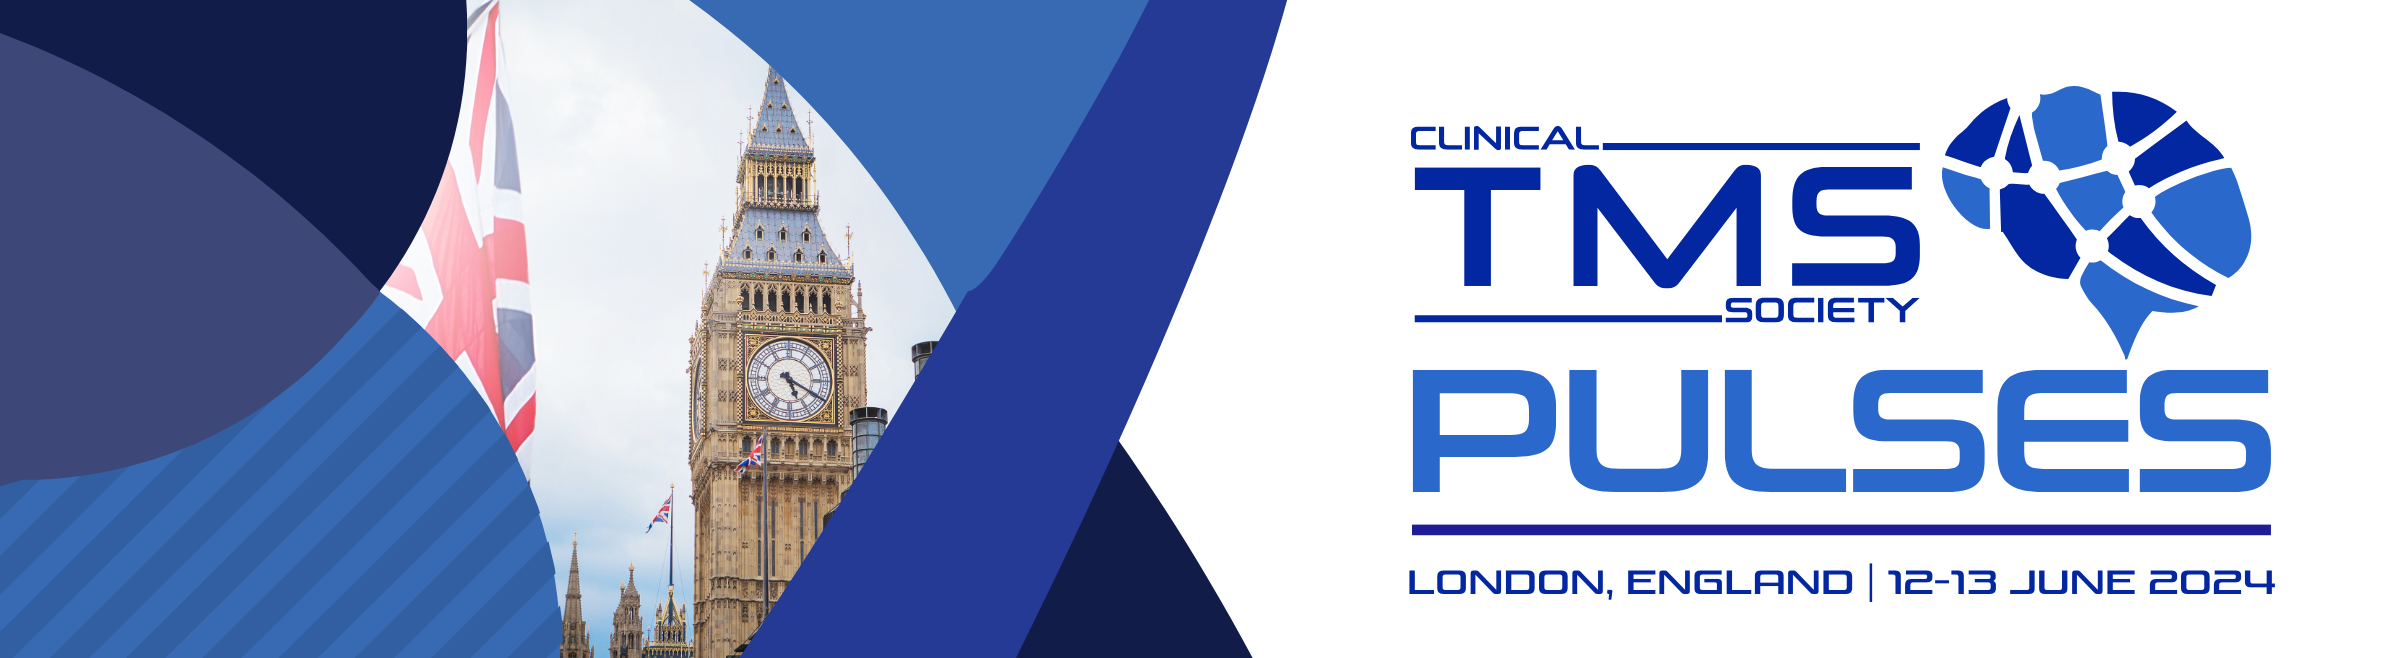 Clinical TMS Society Pulses London